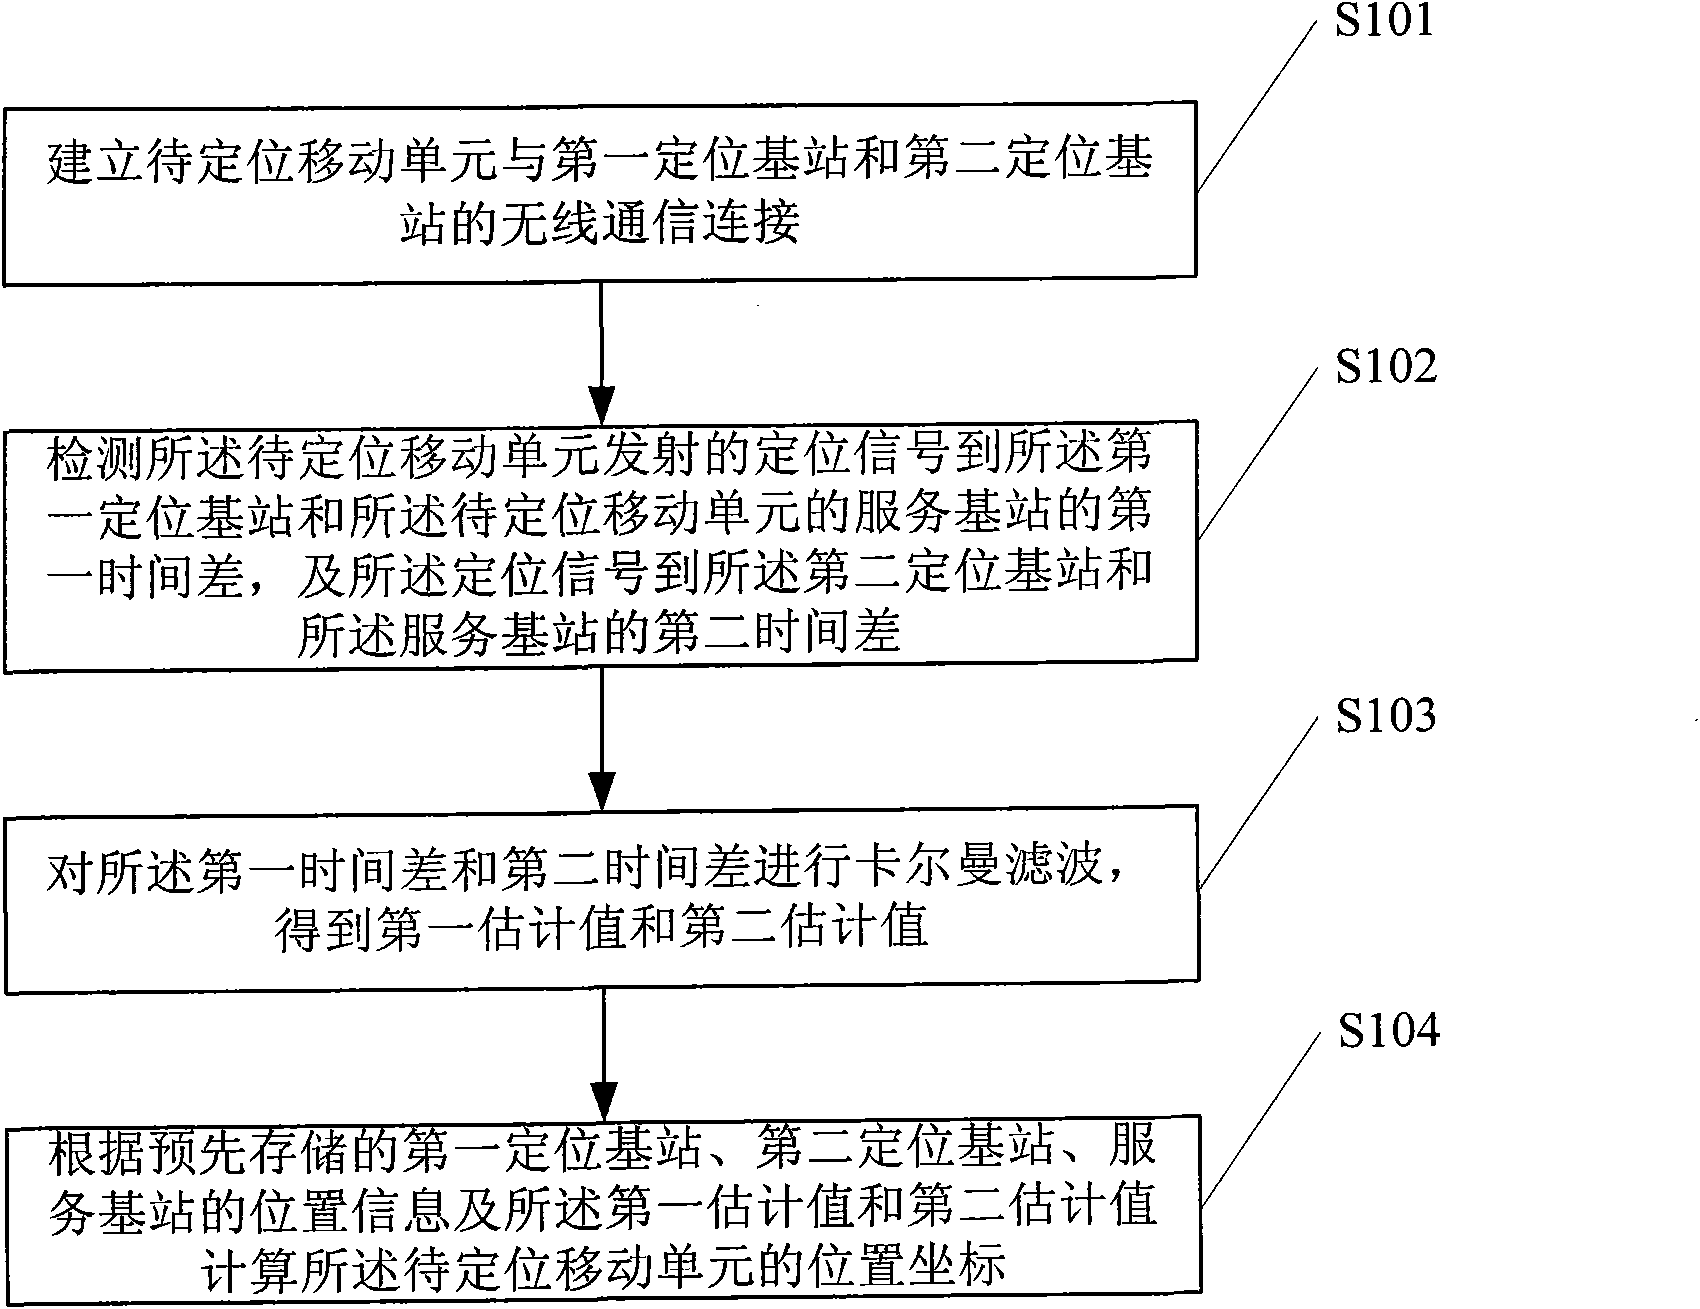 Cellular network positioning method and cellular network positioning device